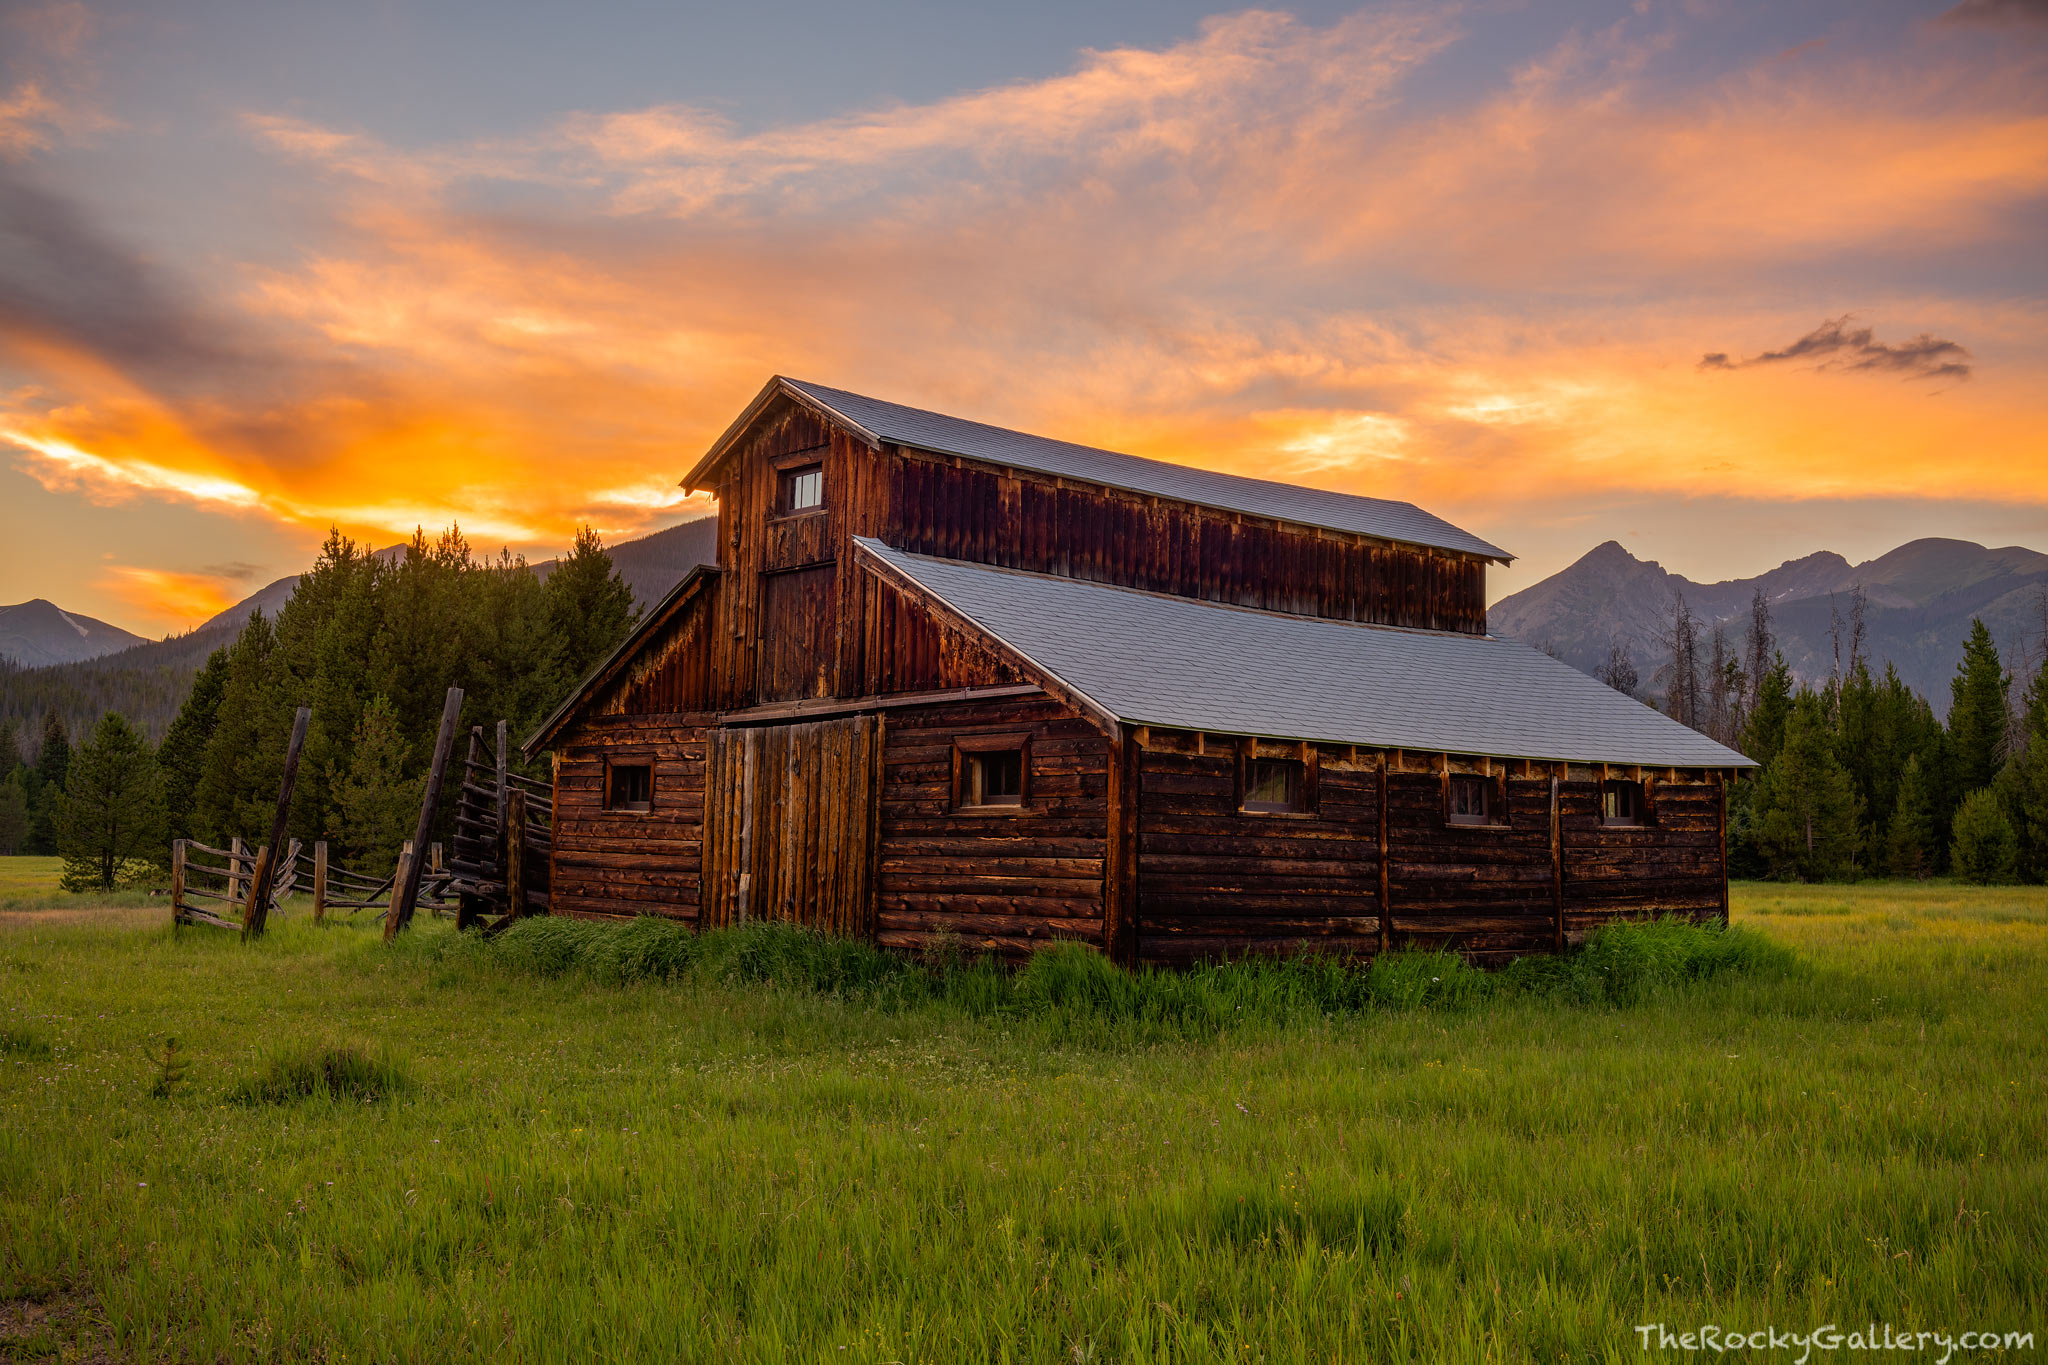 Sunset is coming to the Kawuneeche Valley of Rocky Mountain National Park. Little Buckaroo Barn says goodnight to another lovely...